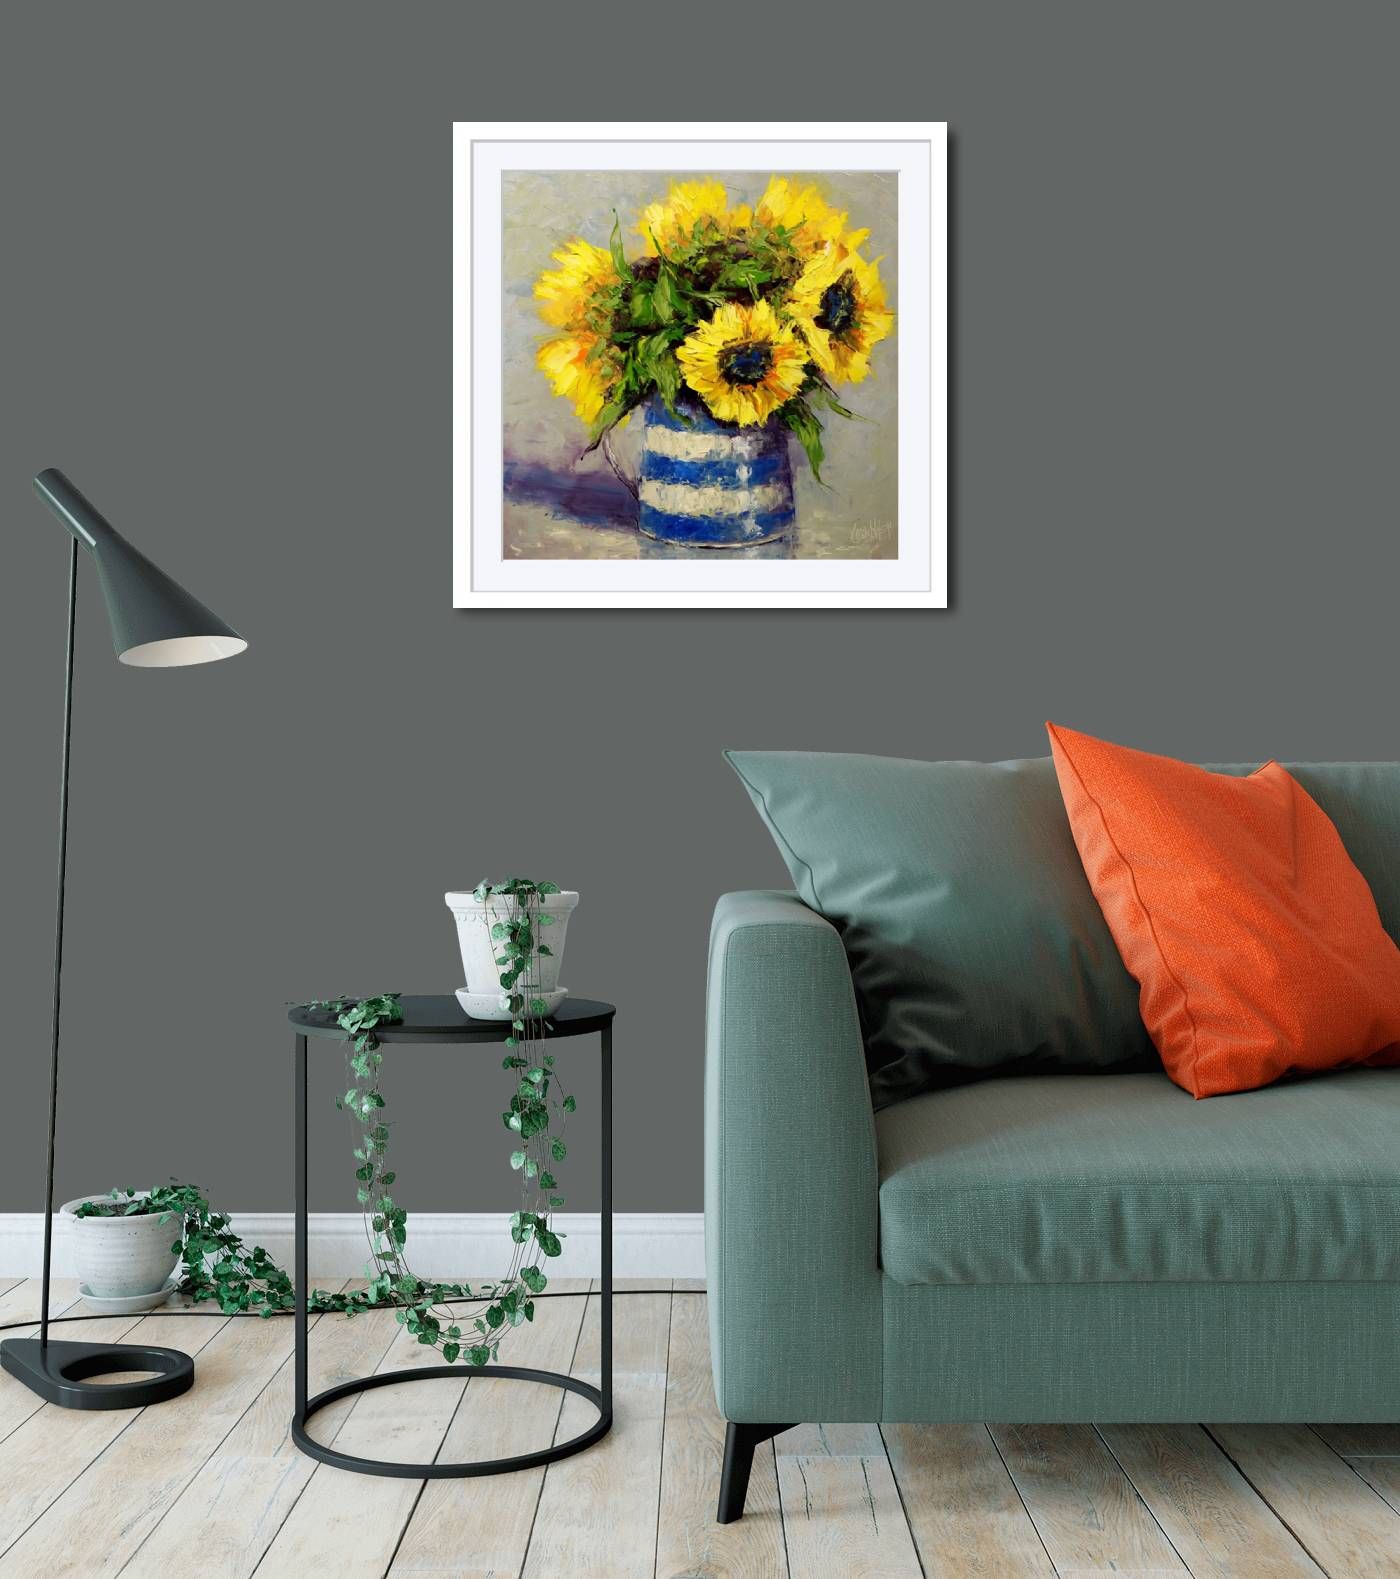 Extra Large - SUNFLOWERS IN A JUG by Karen Wilson